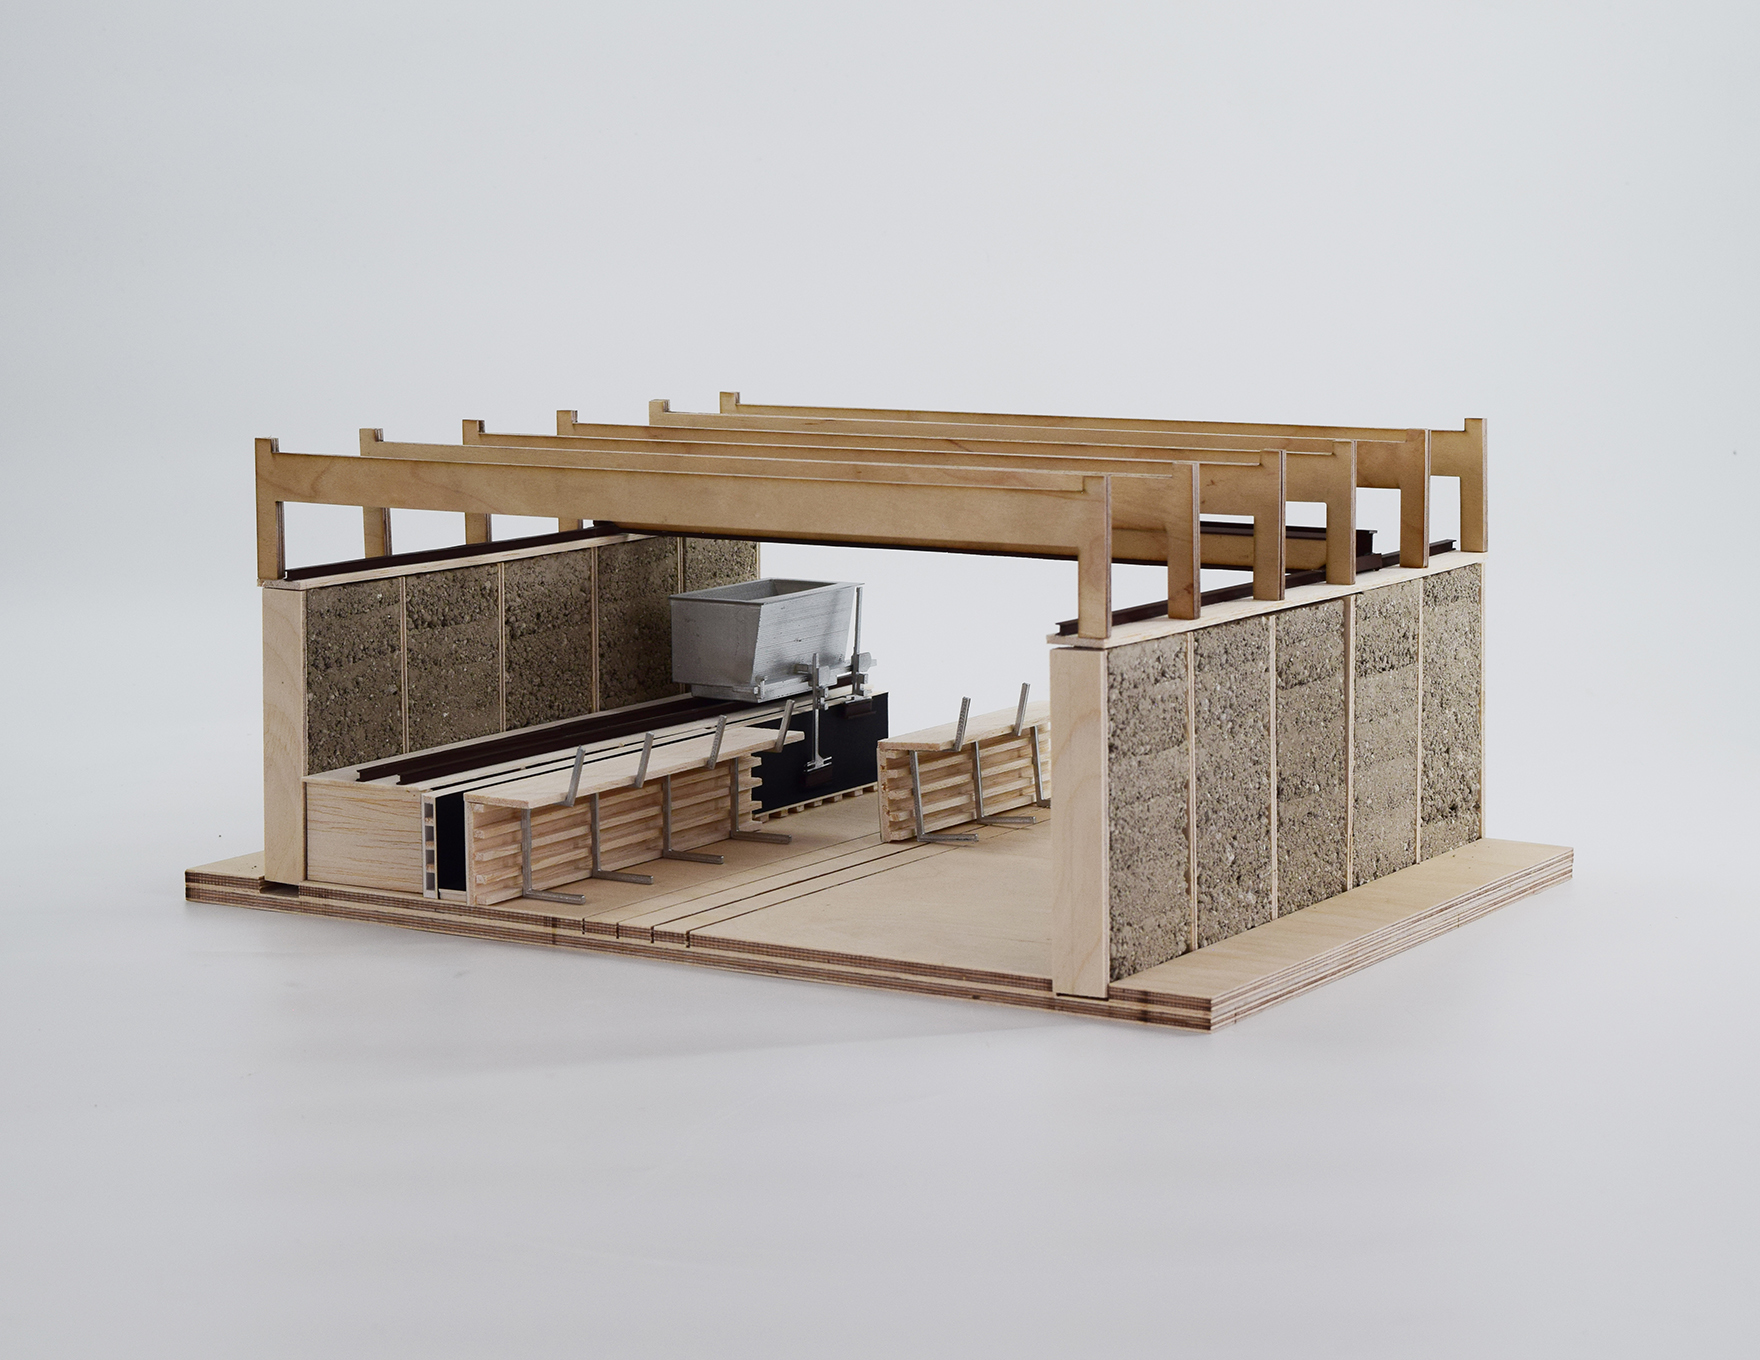 Rammed Earth Research Model Architectural Apprentice Adam Nightingale Faulknerbrowns Architects L